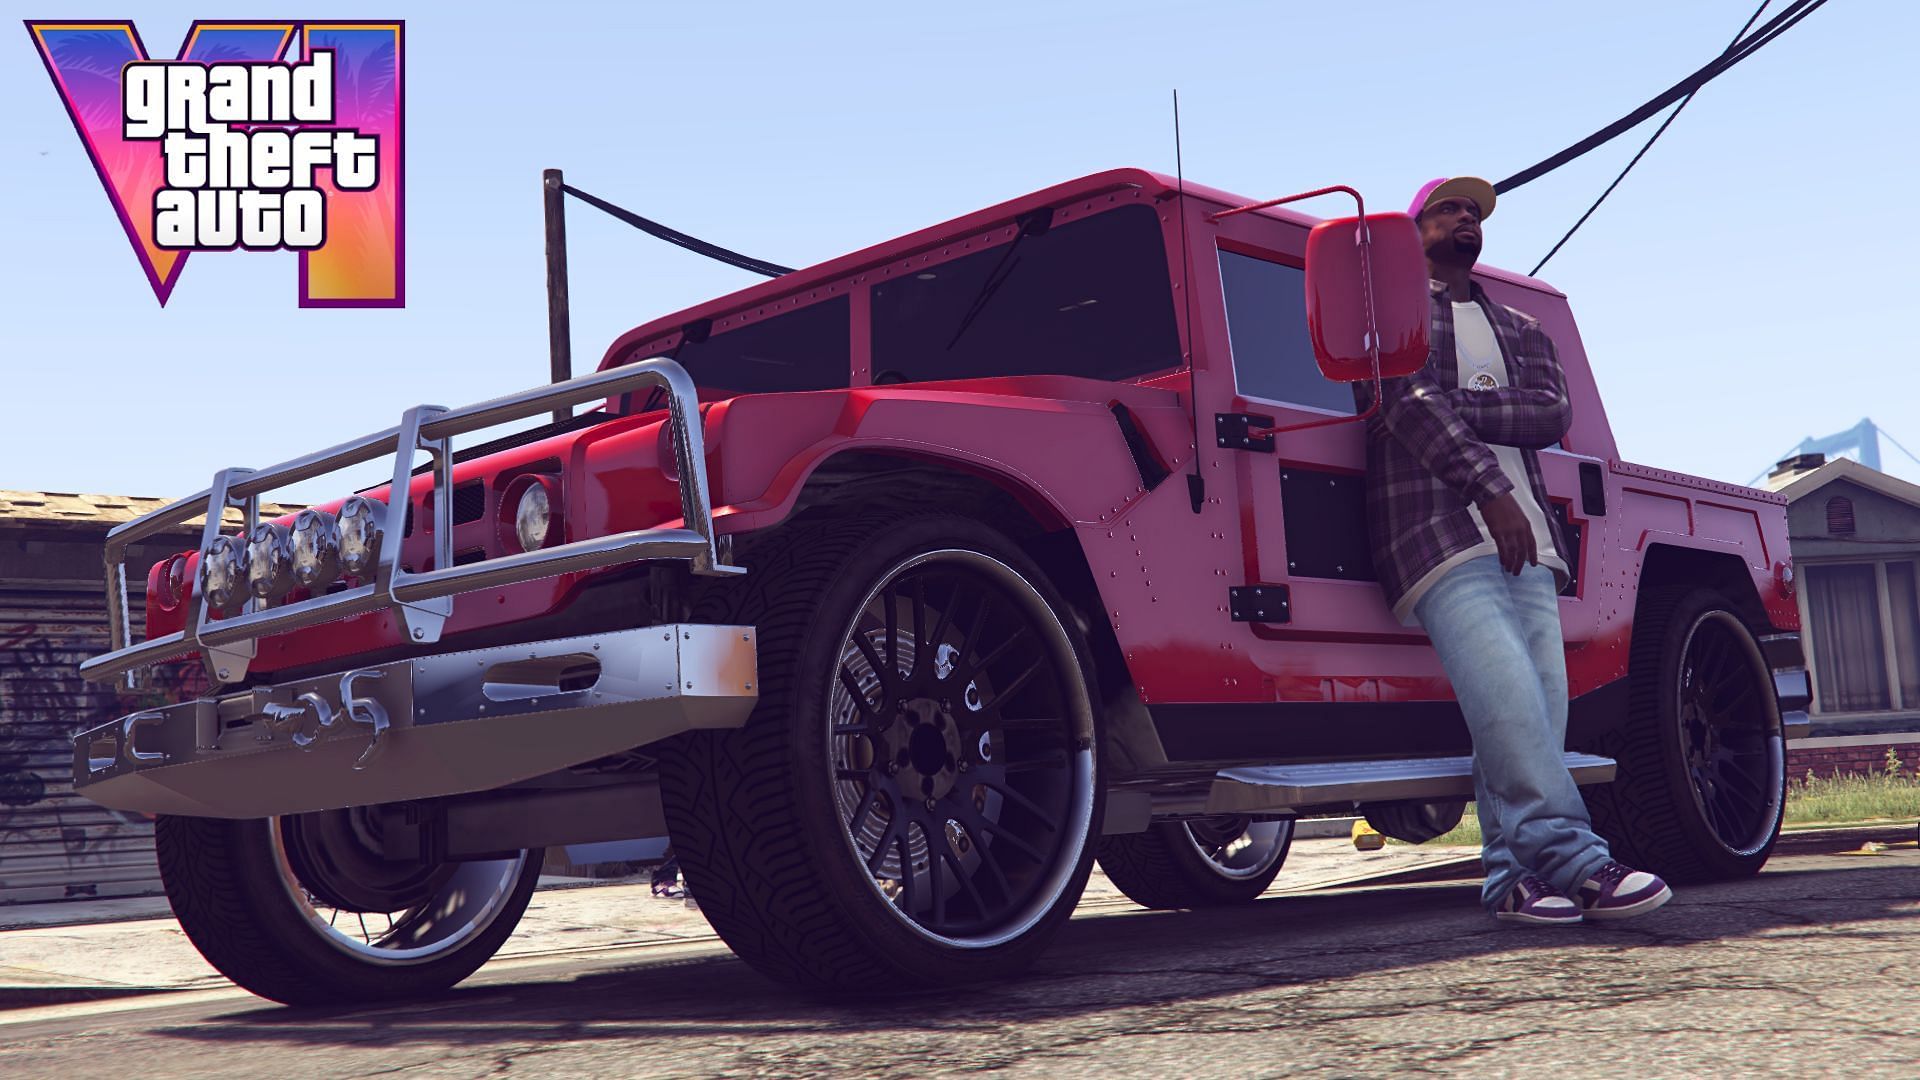 The Patriot Mil-Spec from GTA Online is a must-have car in GTA 6 (Image via GTA Forums/WildBrick142)